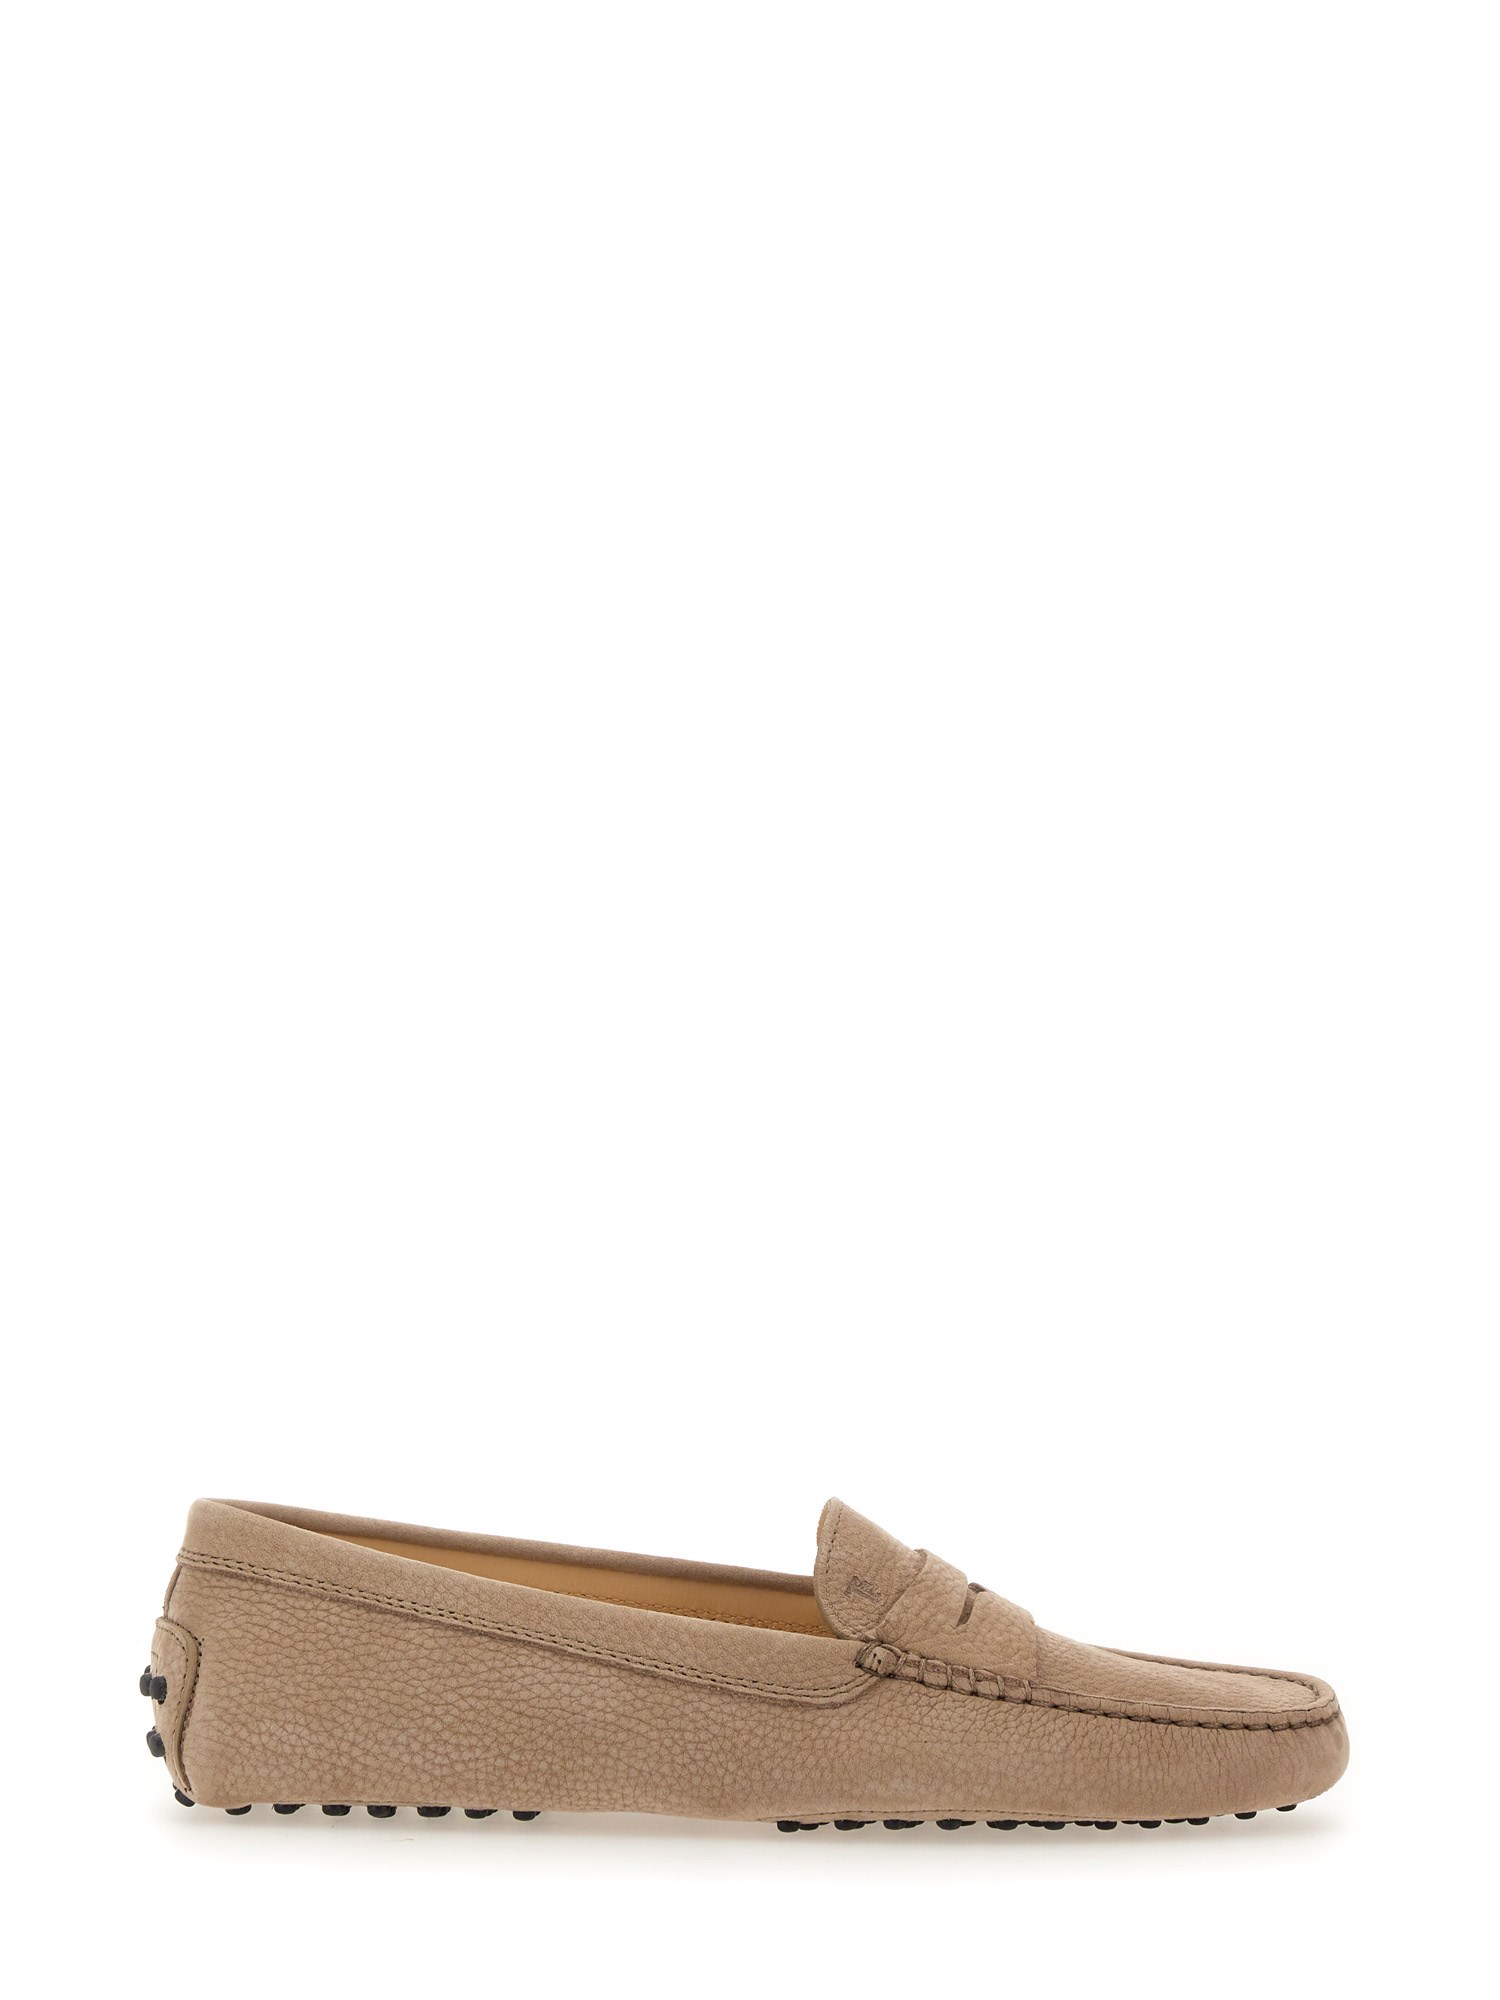 TOD'S RUBBERIZED MOCCASIN